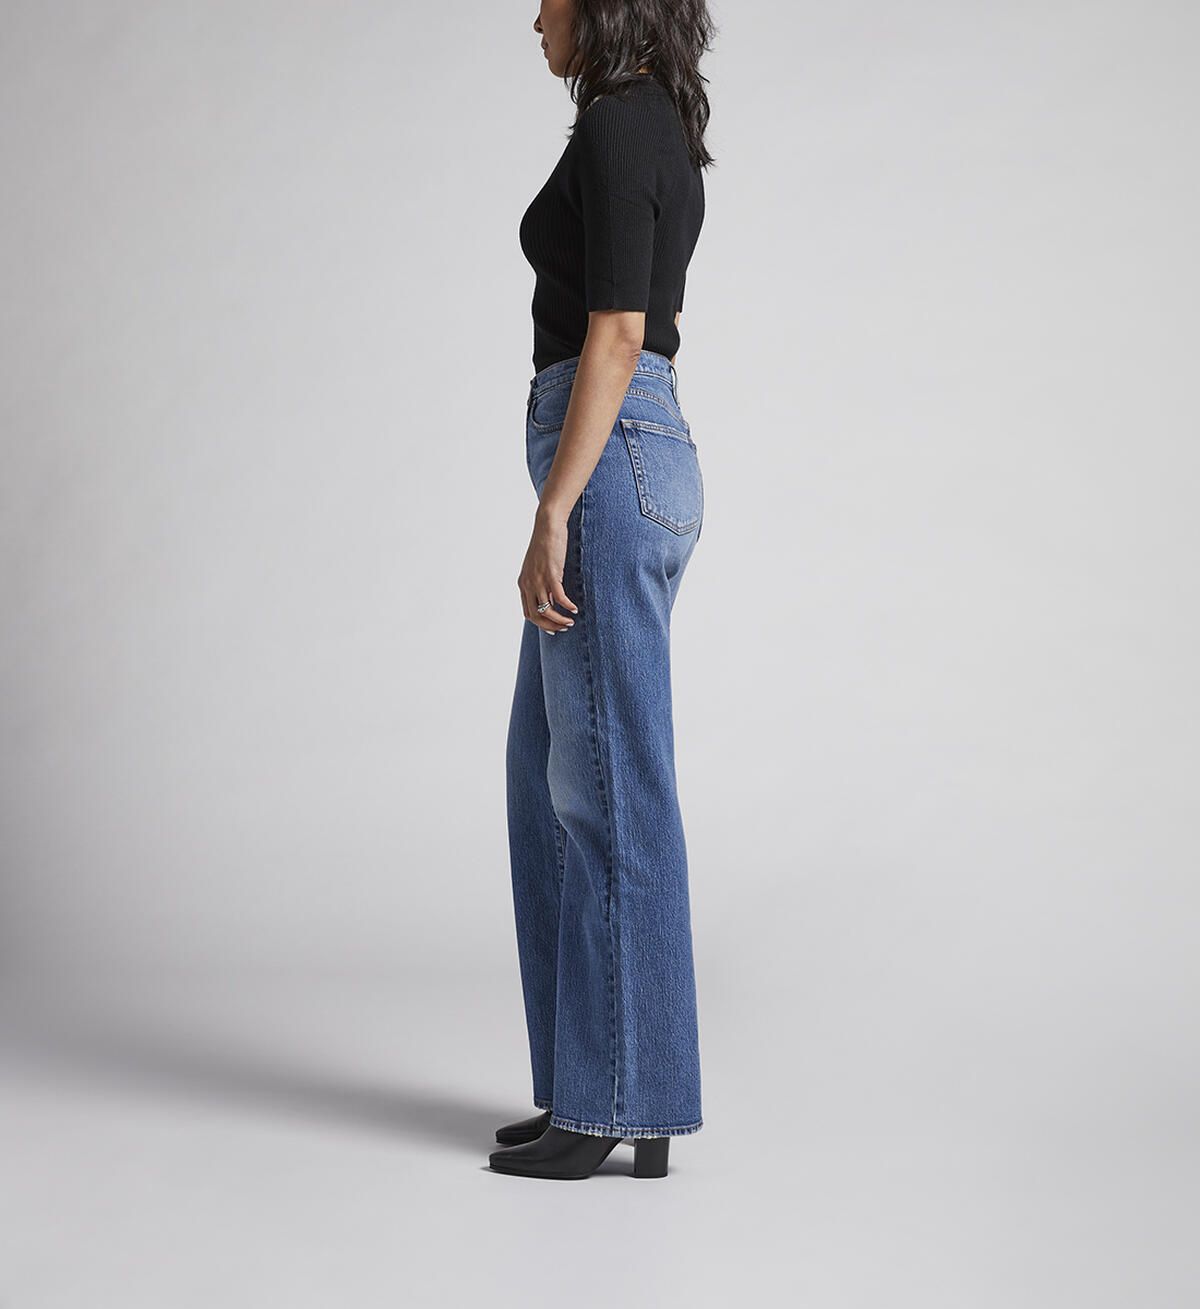 Highly Desirable High Rise Trouser Leg Jeans | Silver Jeans Co. (US)